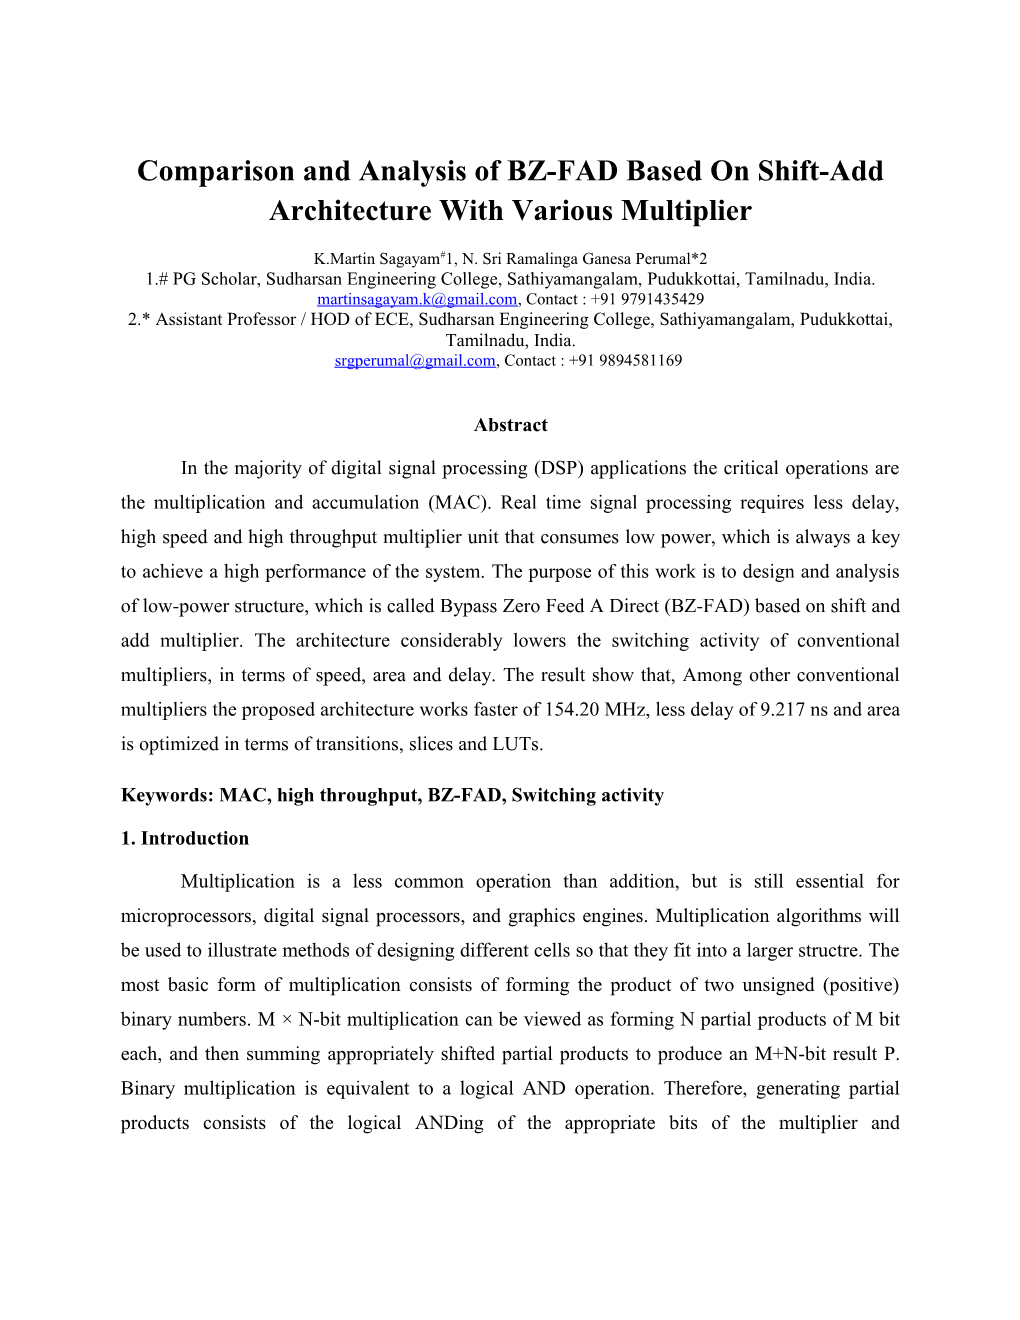 Comparison and Analysis of BZ-FAD Based on Shift-Add Architecture with Various Multiplier